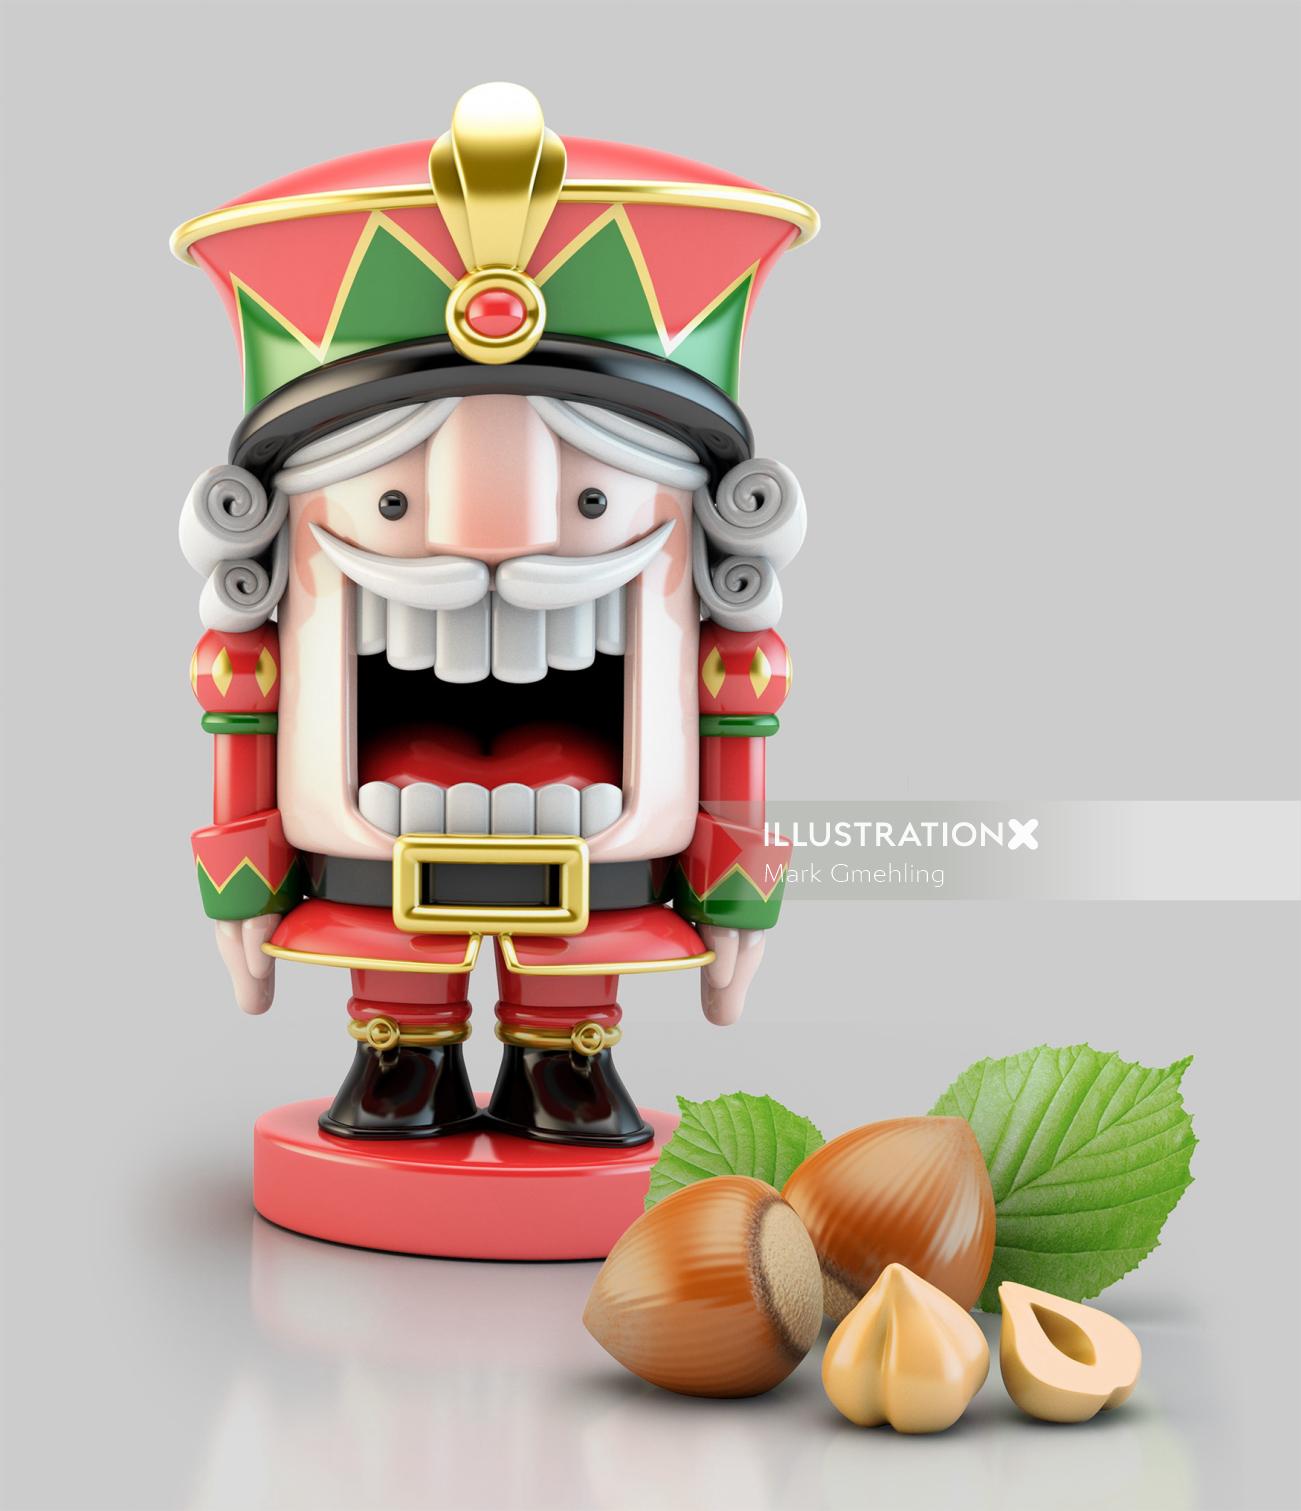 3d character with fruits
